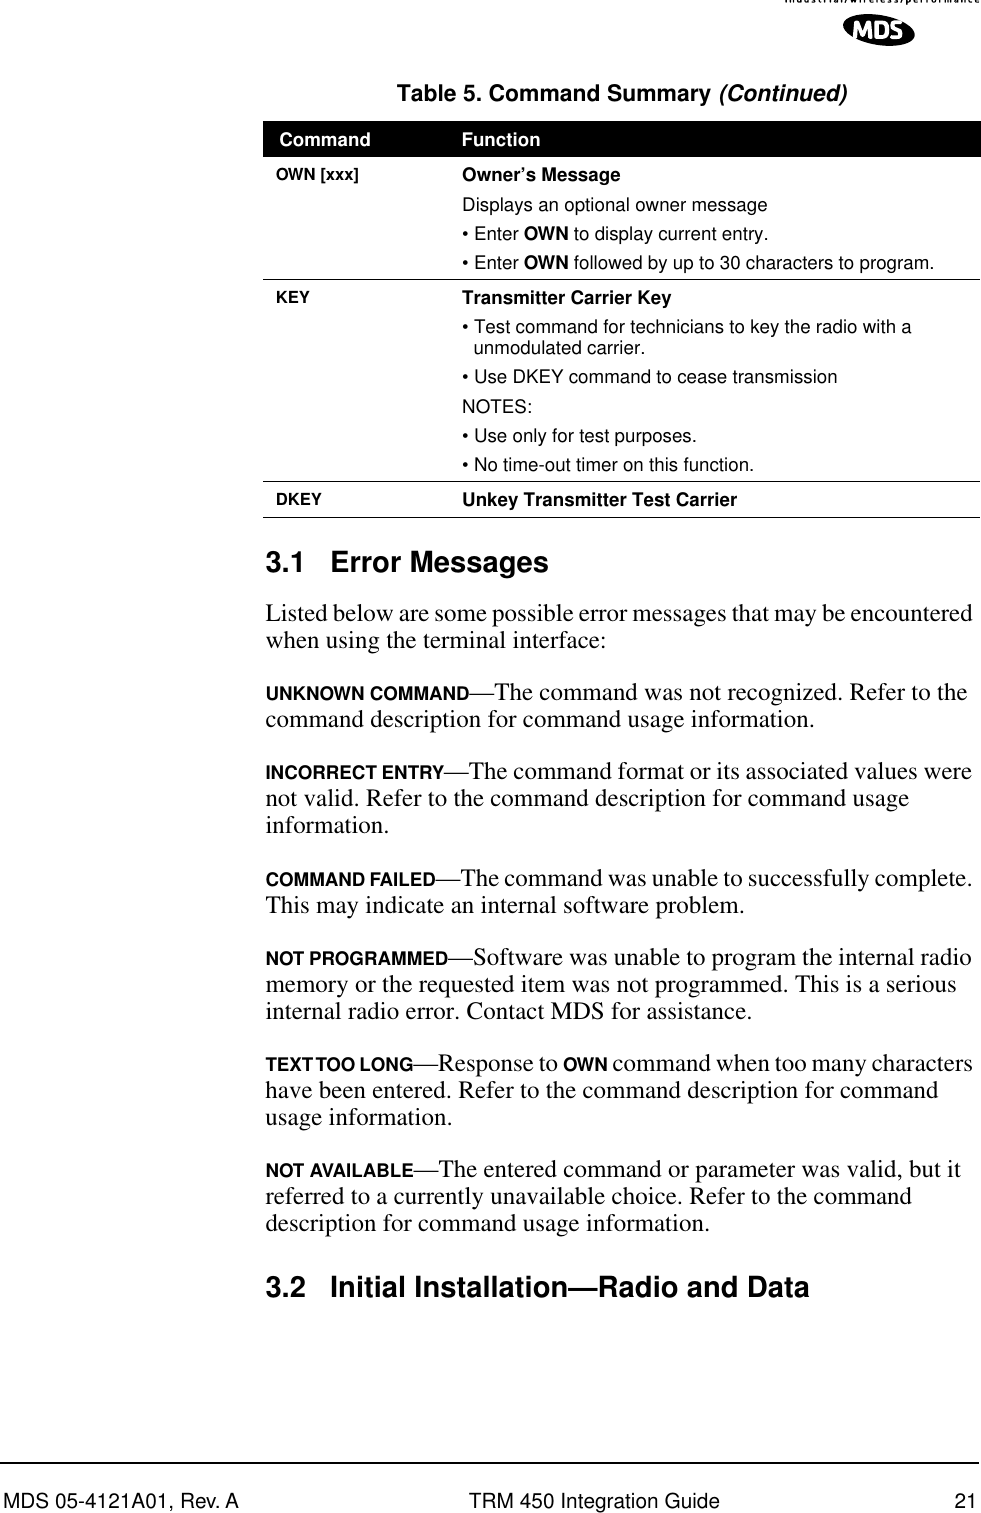 MDS 05-4121A01, Rev. A TRM 450 Integration Guide 213.1 Error MessagesListed below are some possible error messages that may be encountered when using the terminal interface:UNKNOWN COMMAND—The command was not recognized. Refer to the command description for command usage information.INCORRECT ENTRY—The command format or its associated values were not valid. Refer to the command description for command usage information.COMMAND FAILED—The command was unable to successfully complete. This may indicate an internal software problem.NOT PROGRAMMED—Software was unable to program the internal radio memory or the requested item was not programmed. This is a serious internal radio error. Contact MDS for assistance.TEXT TOO  LONG—Response to OWN command when too many characters have been entered. Refer to the command description for command usage information.NOT AVAILABLE—The entered command or parameter was valid, but it referred to a currently unavailable choice. Refer to the command description for command usage information.3.2 Initial Installation—Radio and Data OWN [xxx] Owner’s MessageDisplays an optional owner message• Enter OWN to display current entry.• Enter OWN followed by up to 30 characters to program.KEY Transmitter Carrier Key• Test command for technicians to key the radio with a unmodulated carrier.• Use DKEY command to cease transmissionNOTES: • Use only for test purposes.• No time-out timer on this function.DKEY Unkey Transmitter Test CarrierTable 5. Command Summary (Continued)Command Function